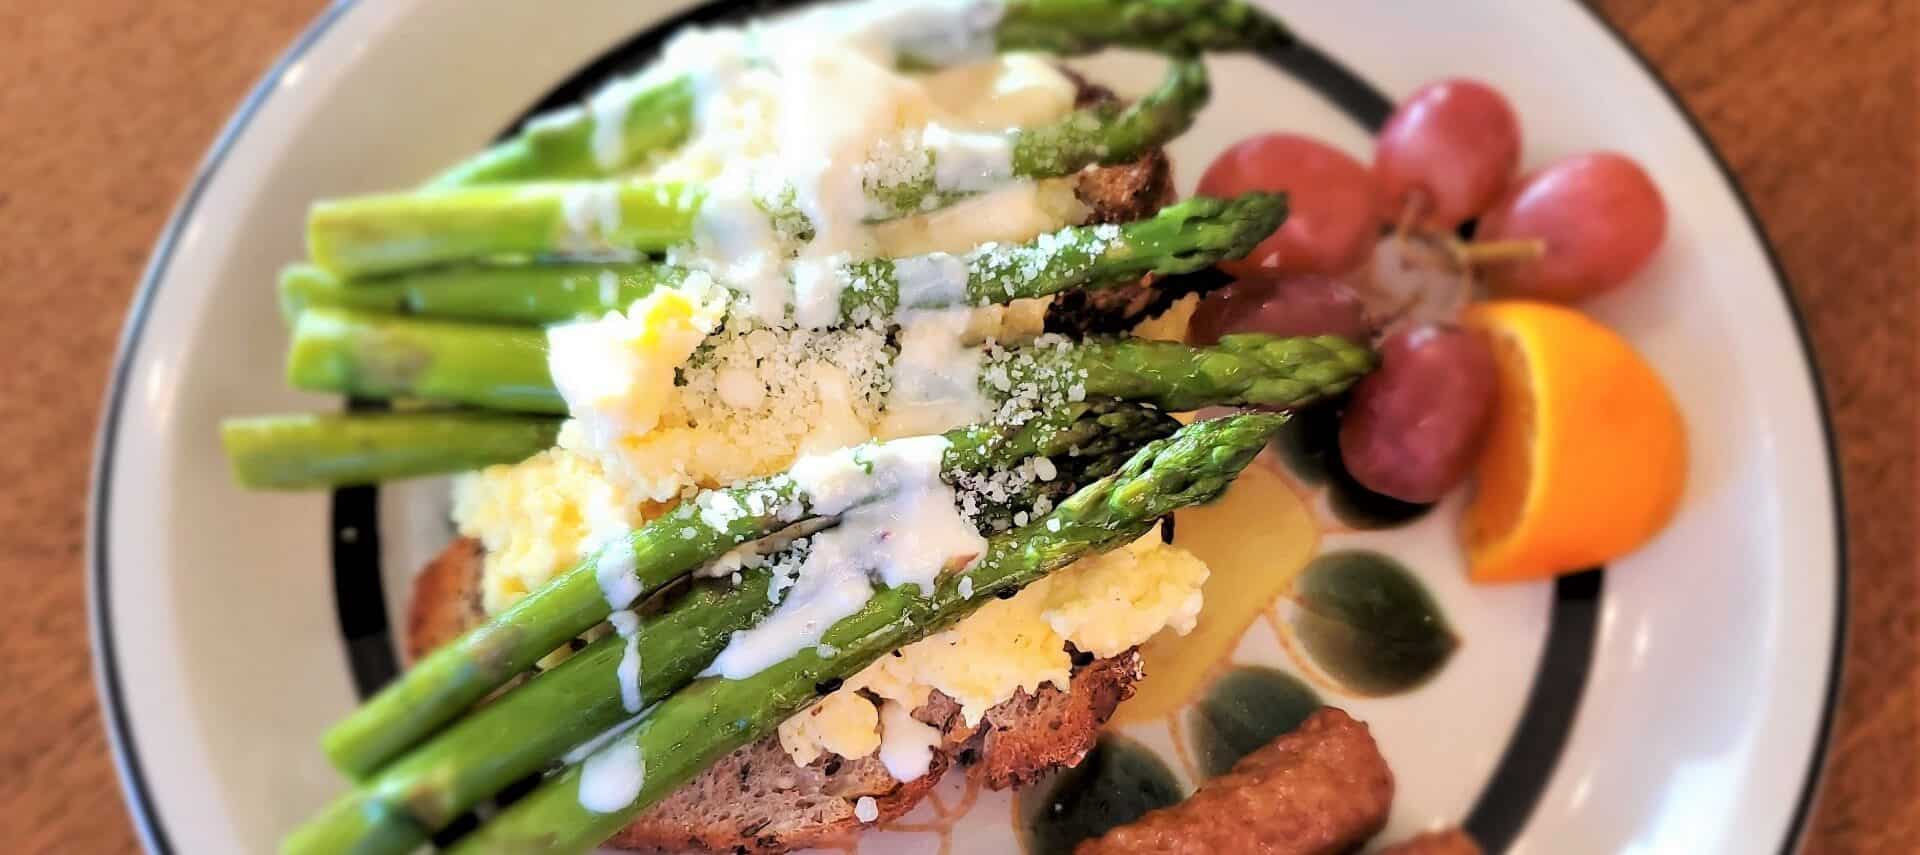 Breakfast plate with orange, grapes and eggs on toast with bright green asparagus